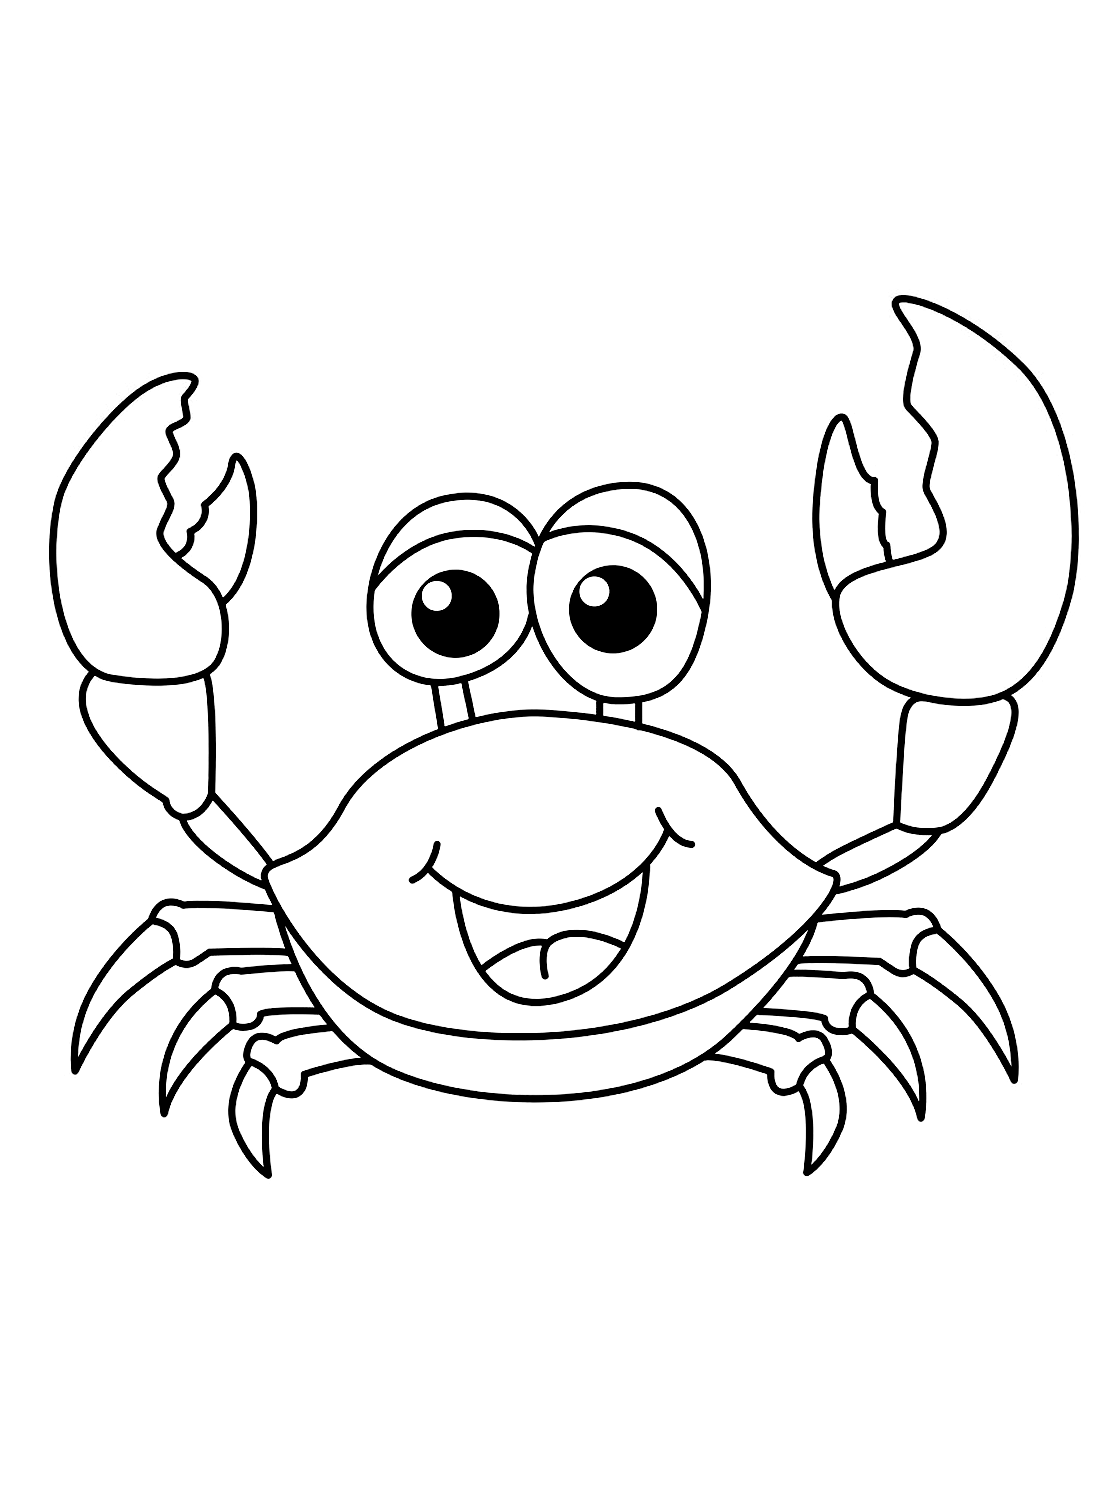 Simple Crab Printable from Crab